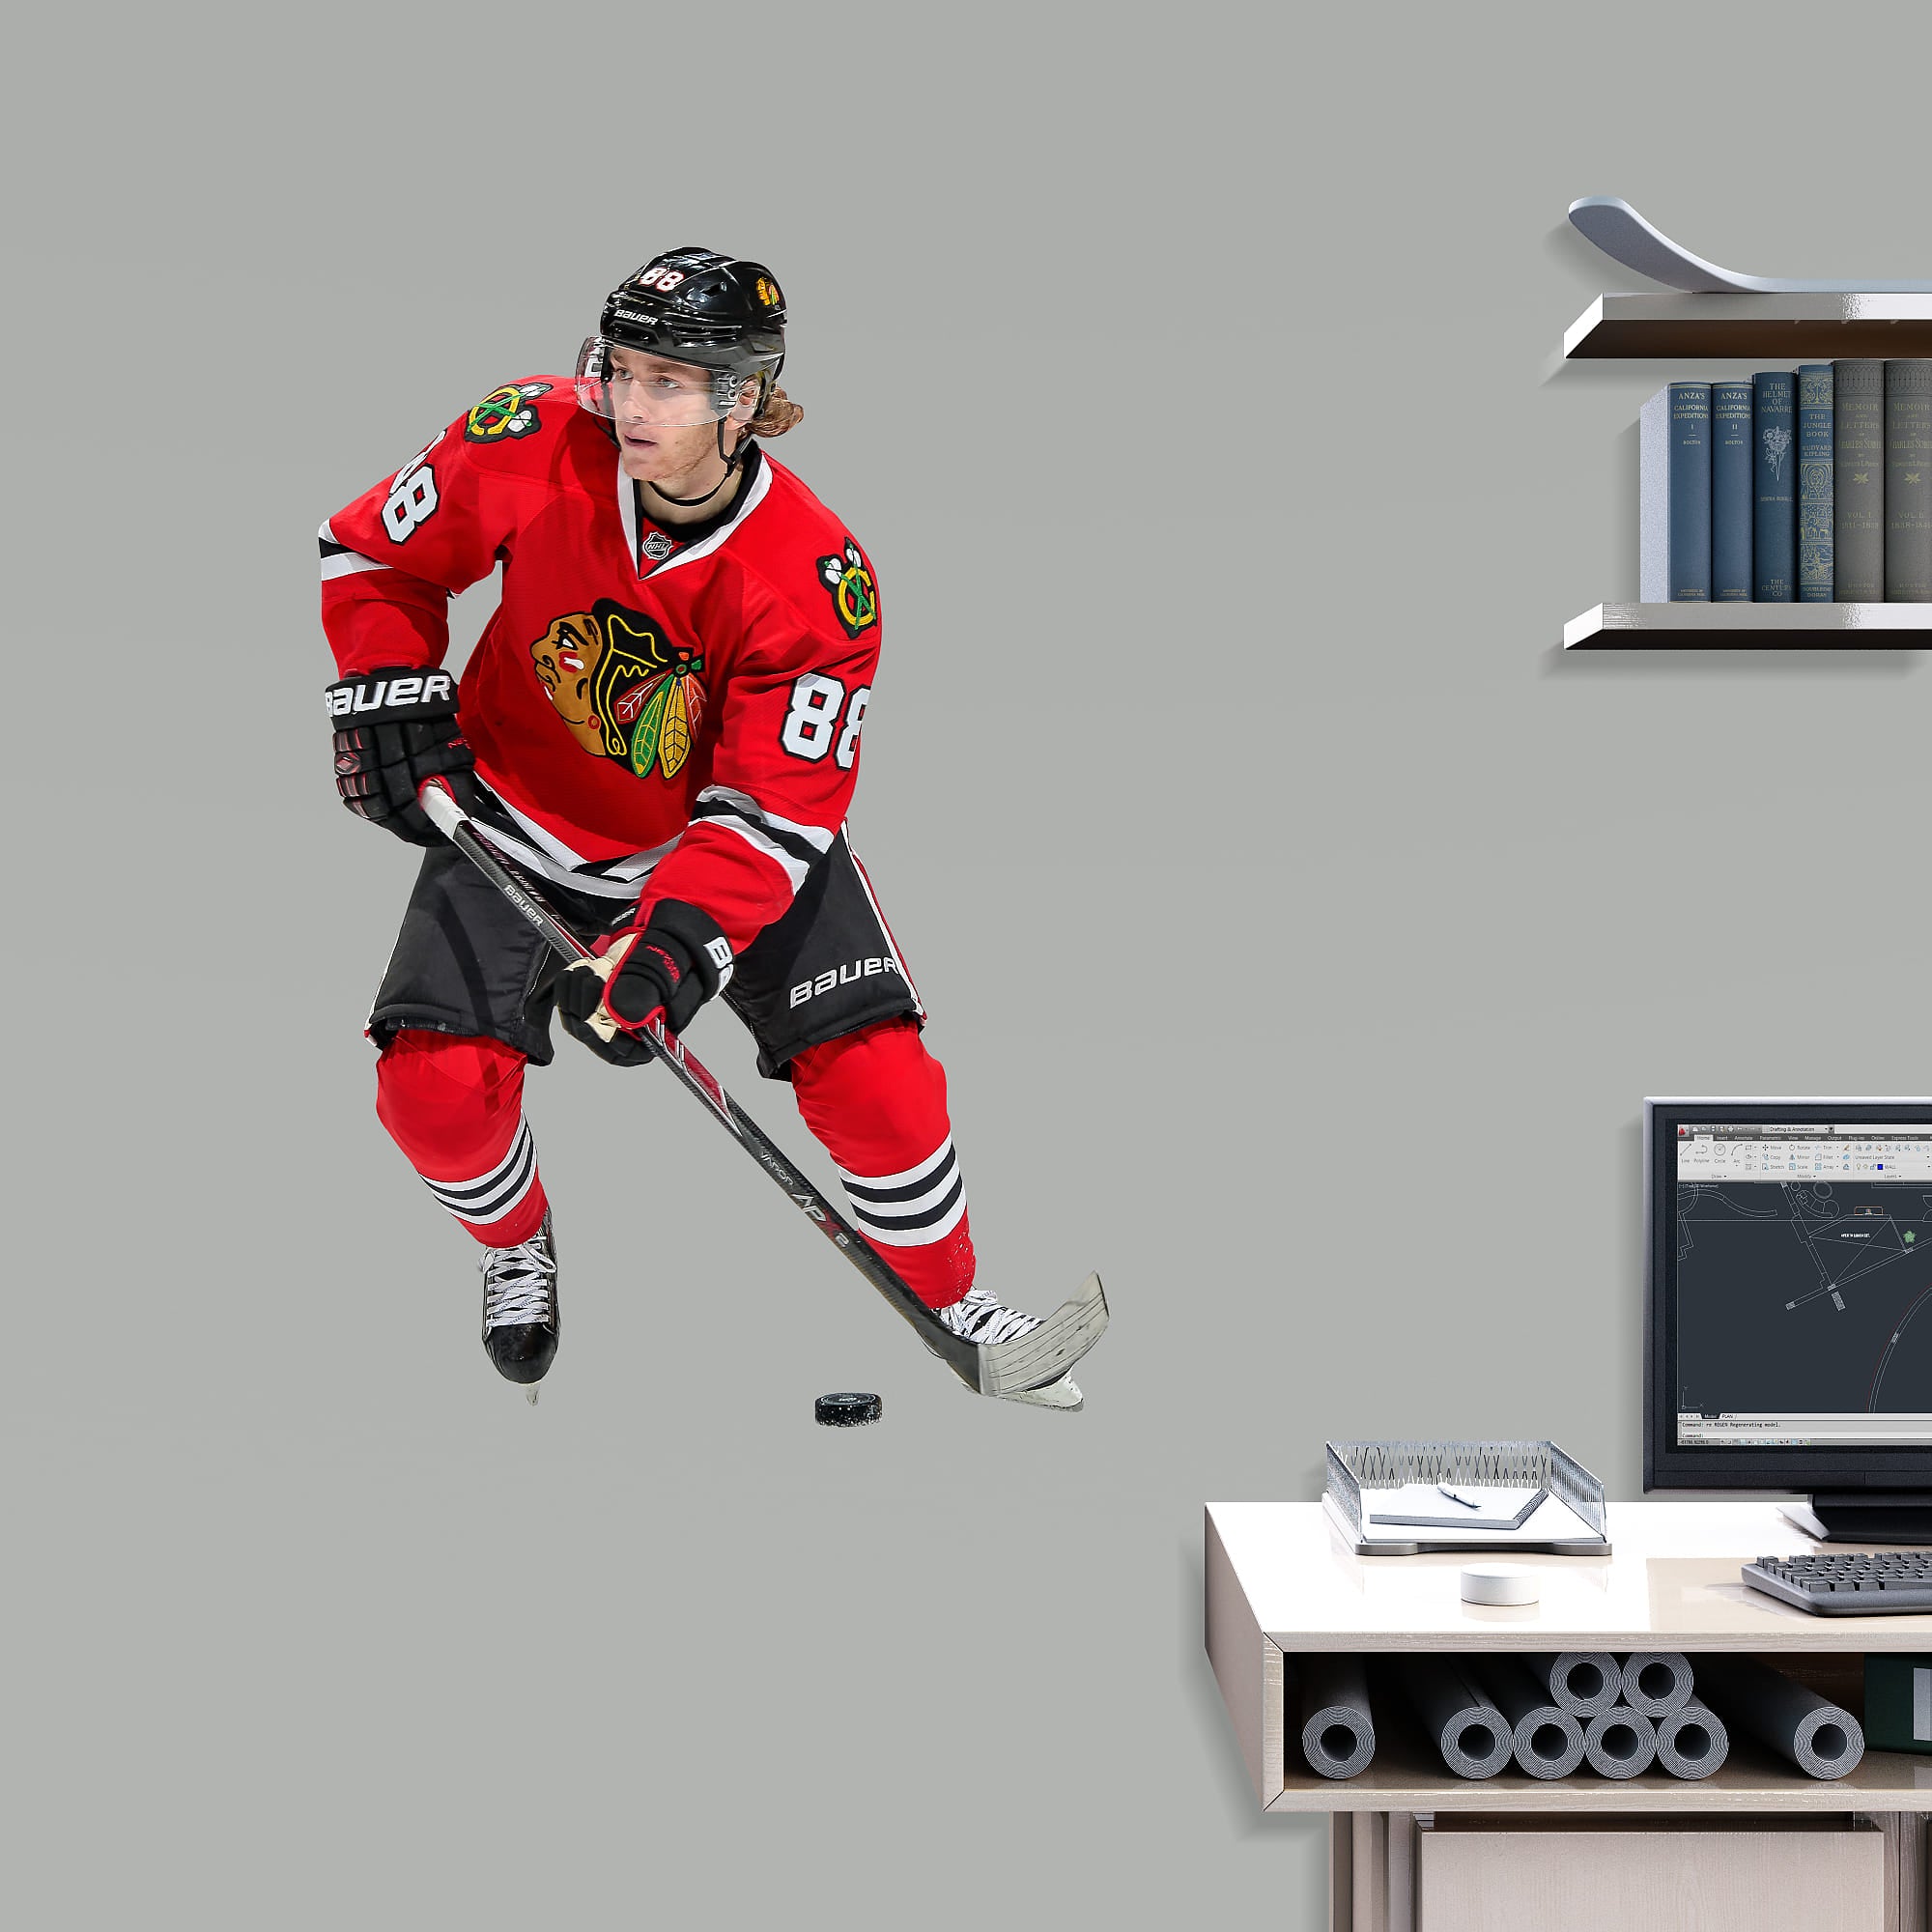 Patrick Kane for Chicago Blackhawks - Officially Licensed NHL Removable Wall Decal 22.0"W x 32.0"H by Fathead | Vinyl